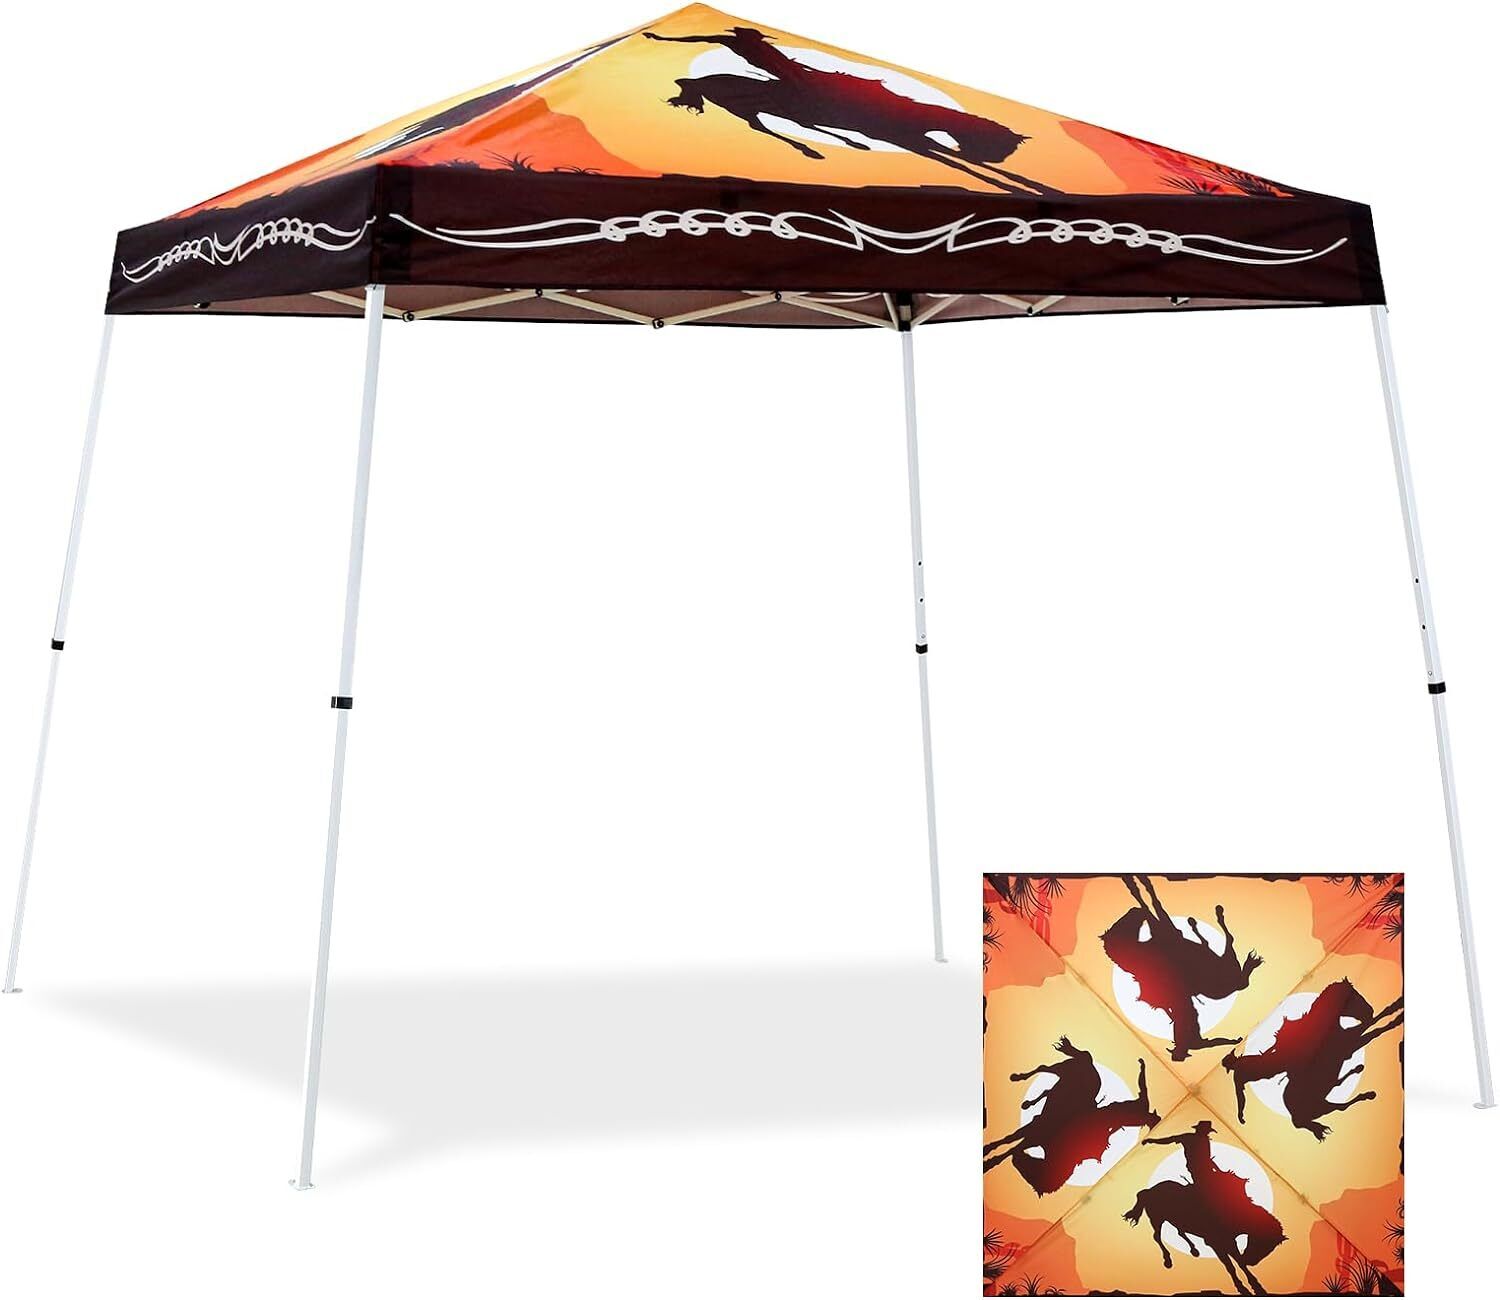 10x10 Slant Leg Pop-up Canopy Tent Easy One Person Setup Instant Outdoor Beach 